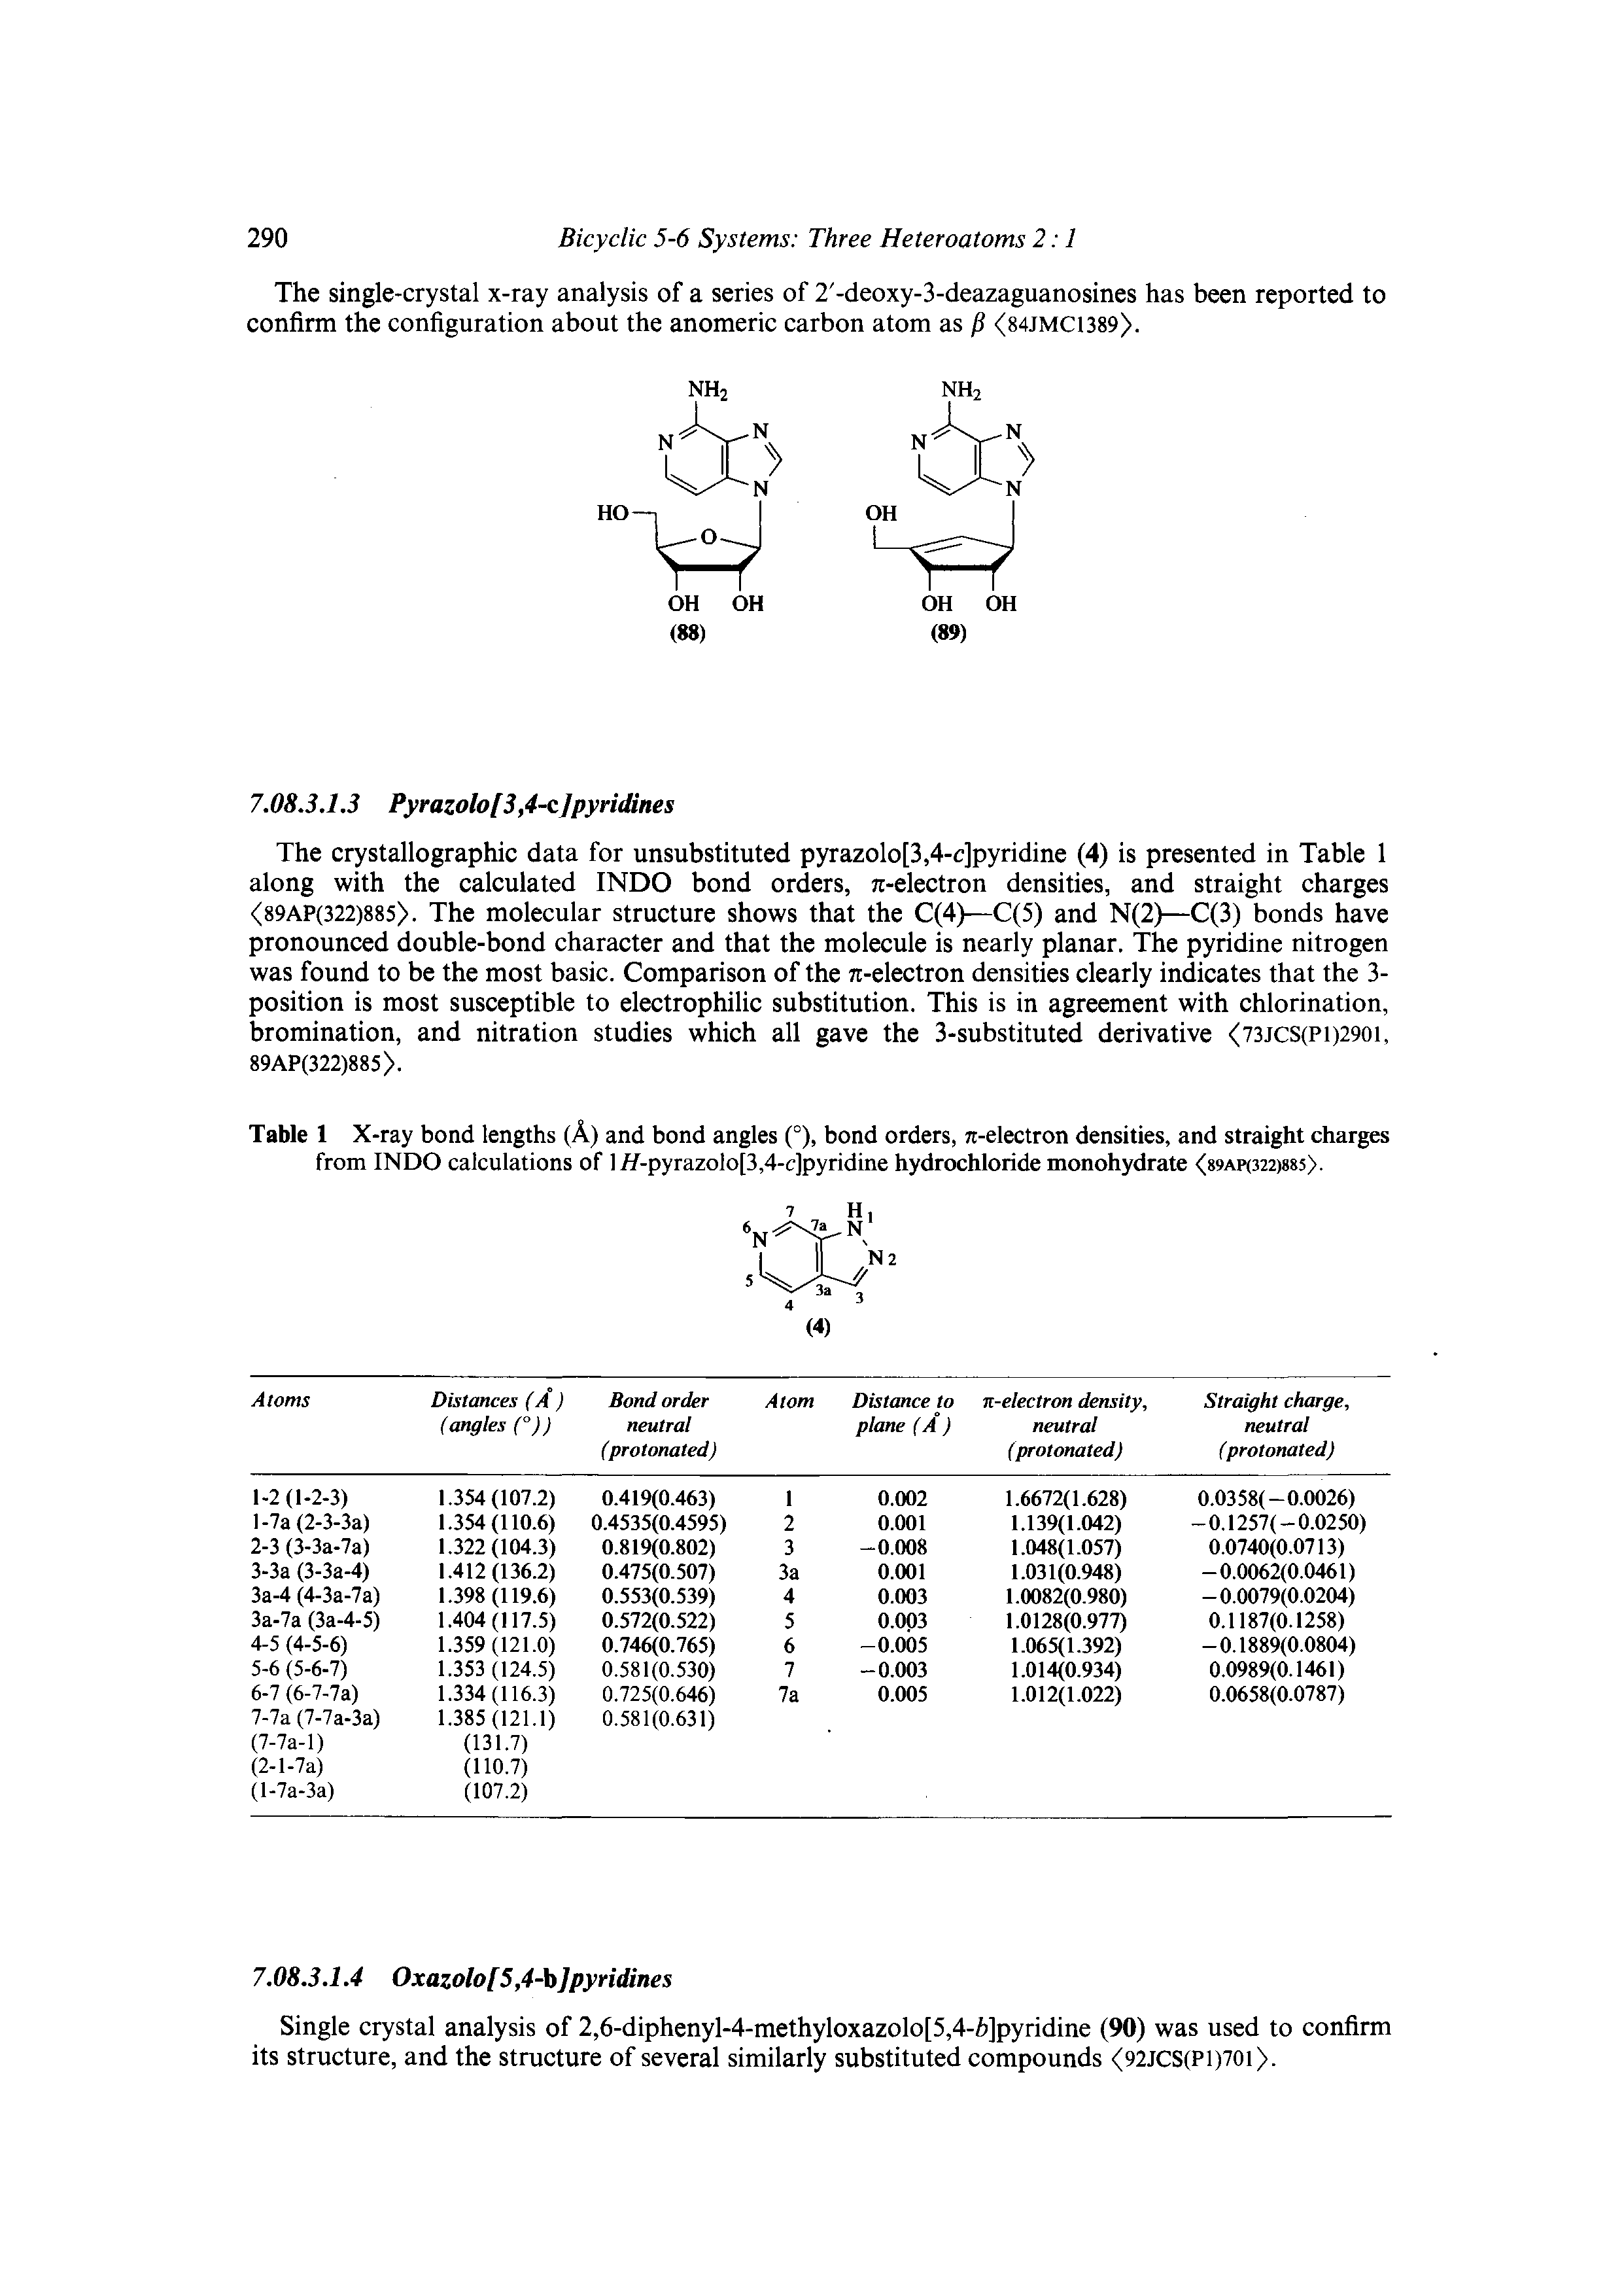 Table 1 X-ray bond lengths (A) and bond angles (°), bond orders, n-electron densities, and straight charges from INDO calculations of 177-pyrazolo[3,4-c]pyridine hydrochloride monohydrate <89ap<322)885>.